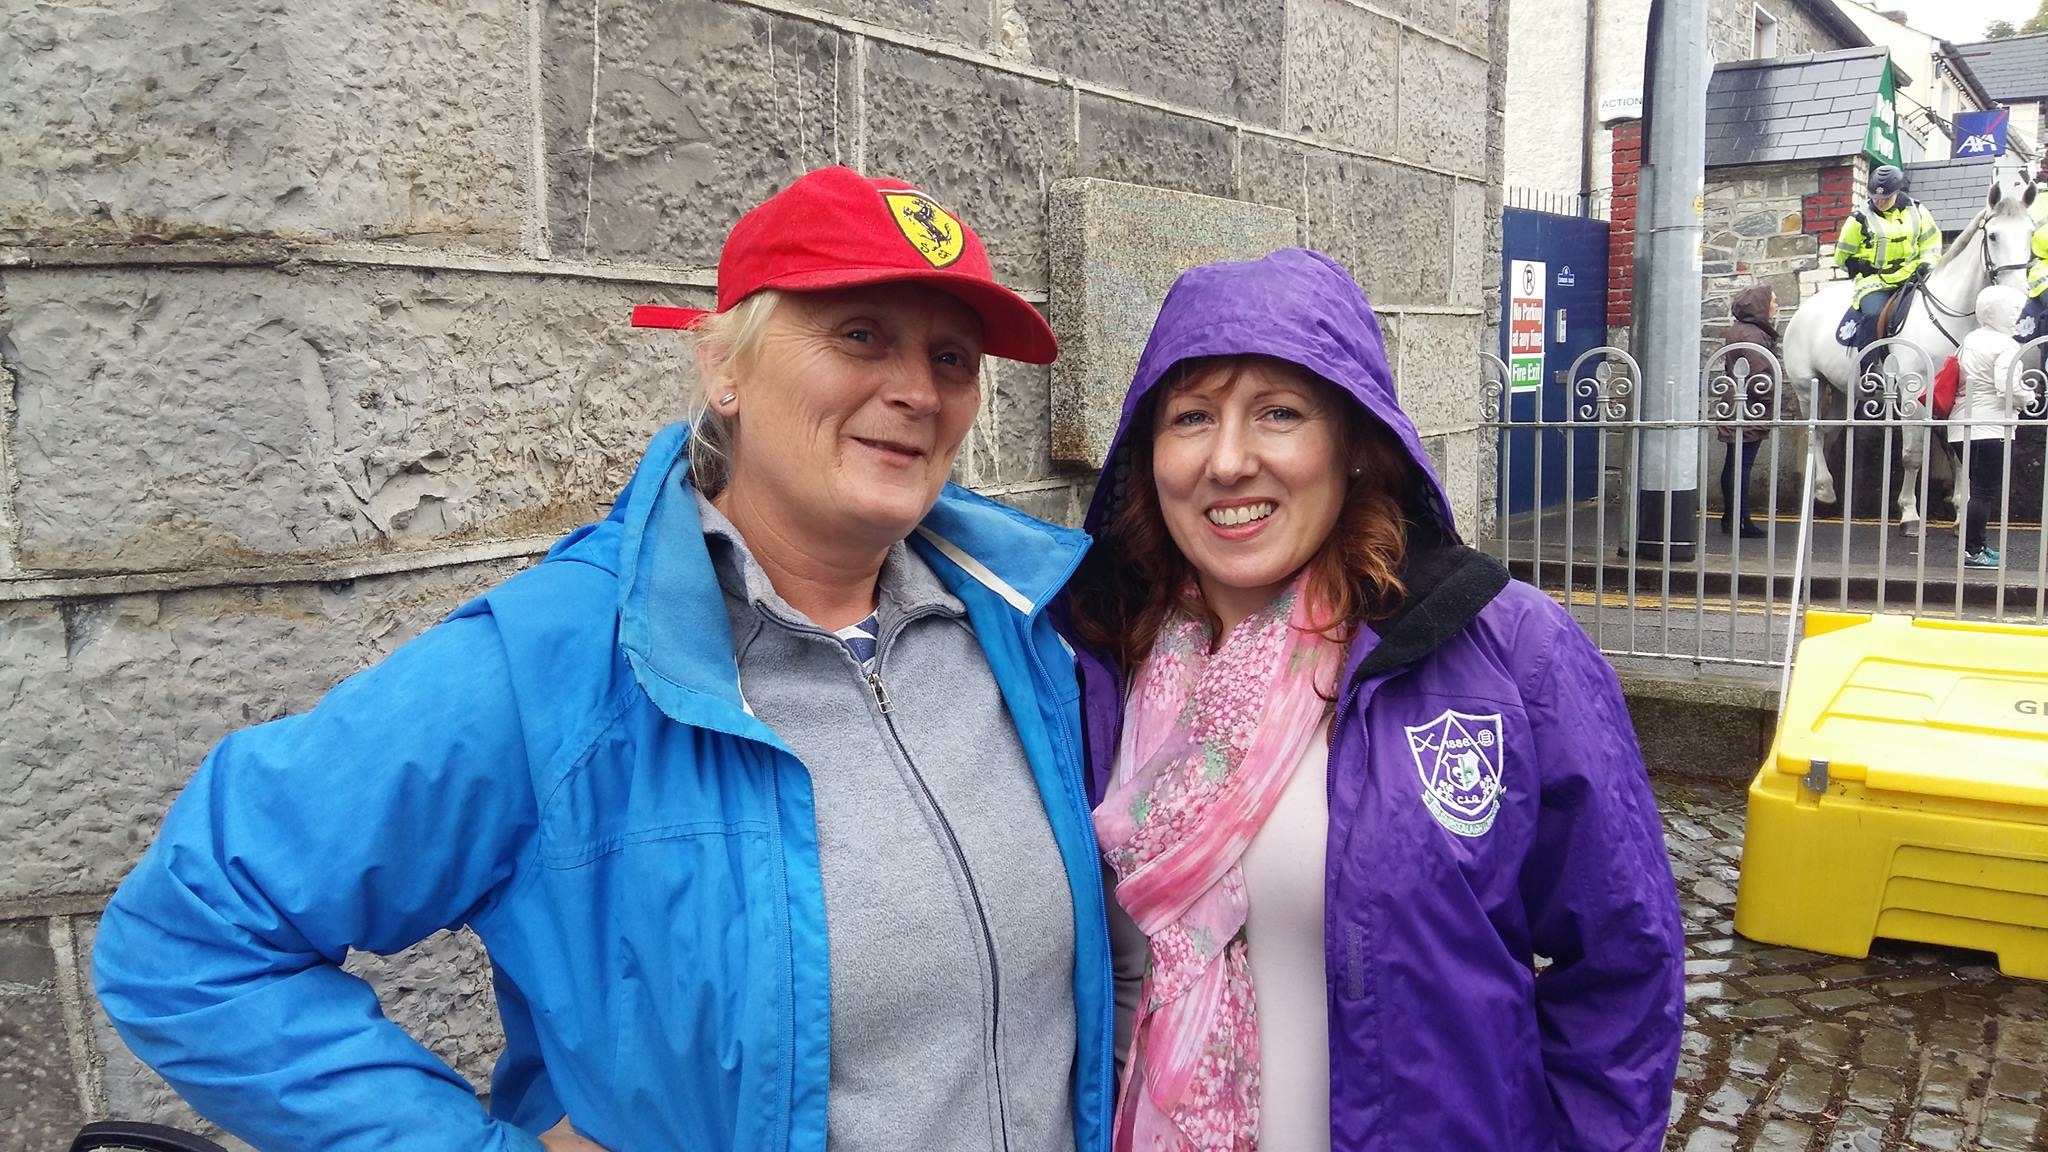 Liona O'Toole with Jackie Kearney at Lucan Festival